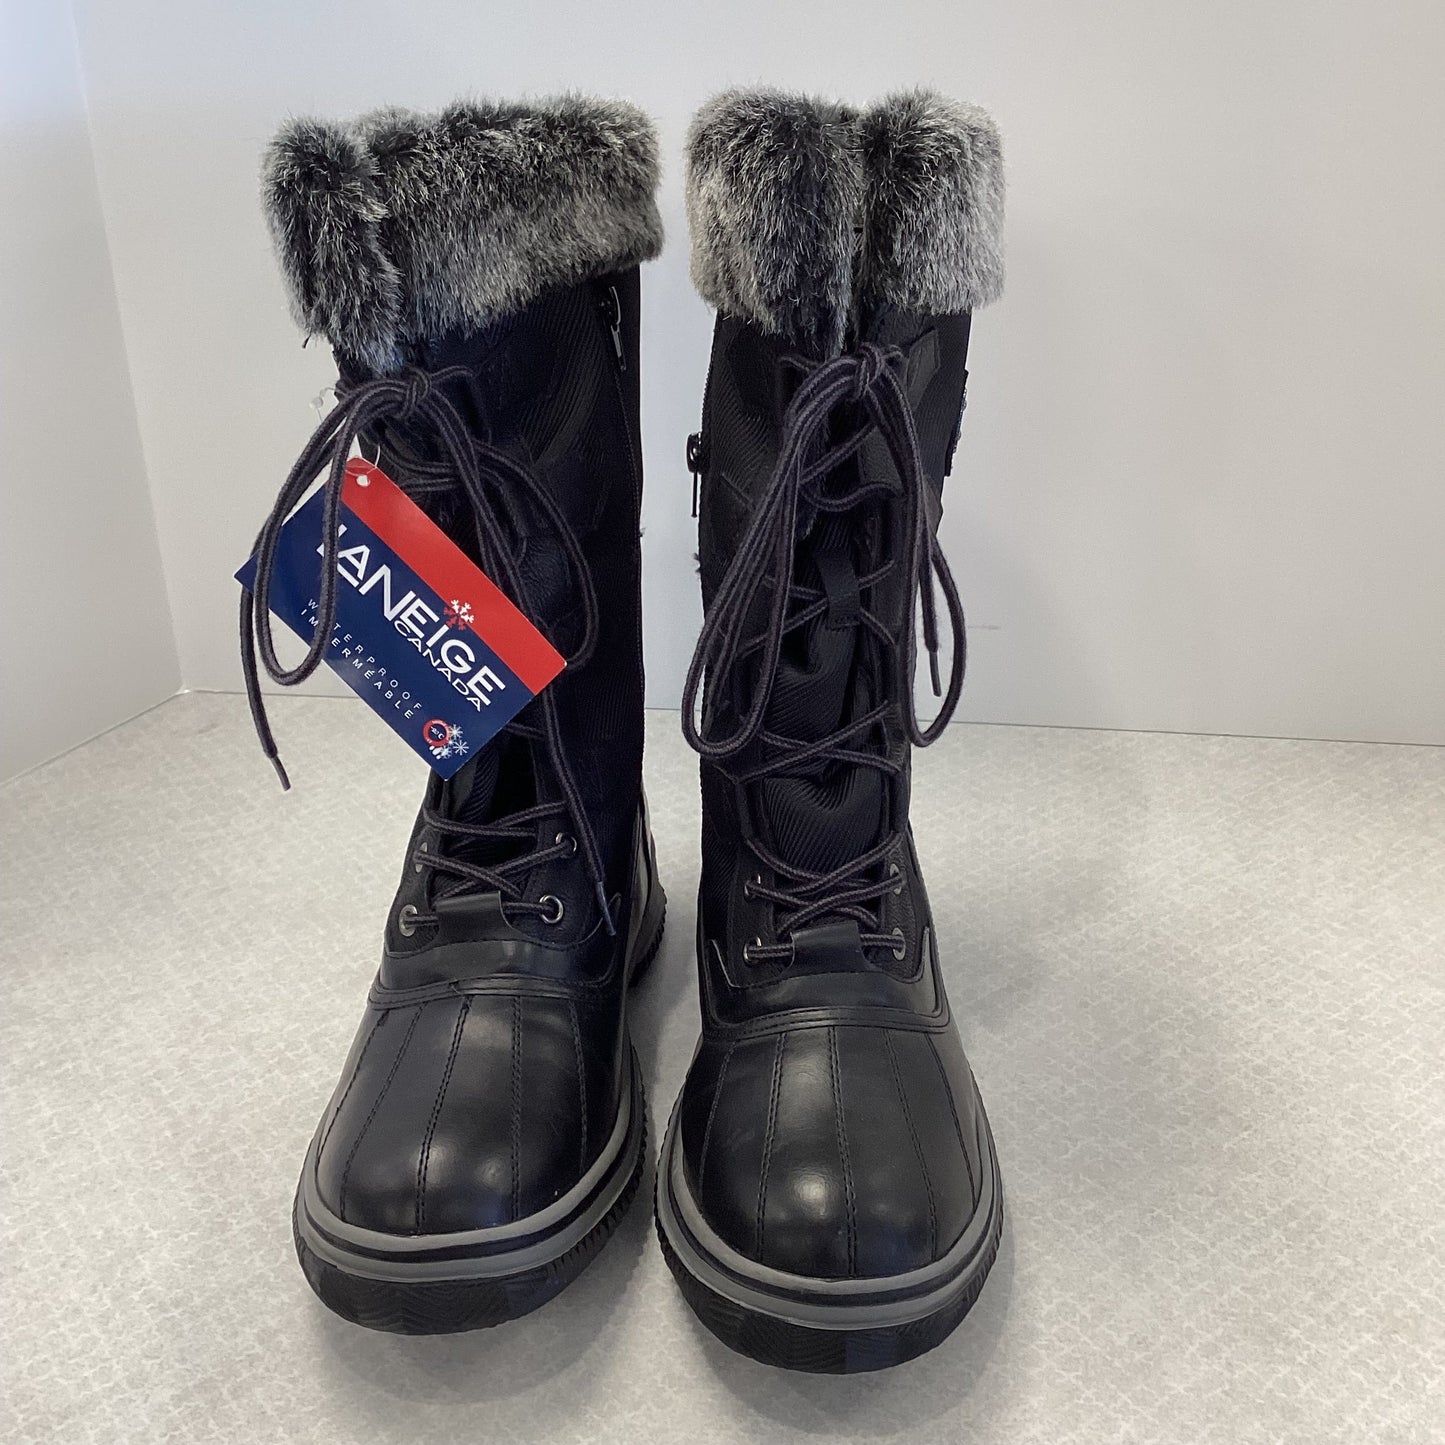 Boots Snow By LaNeige  Size: 8